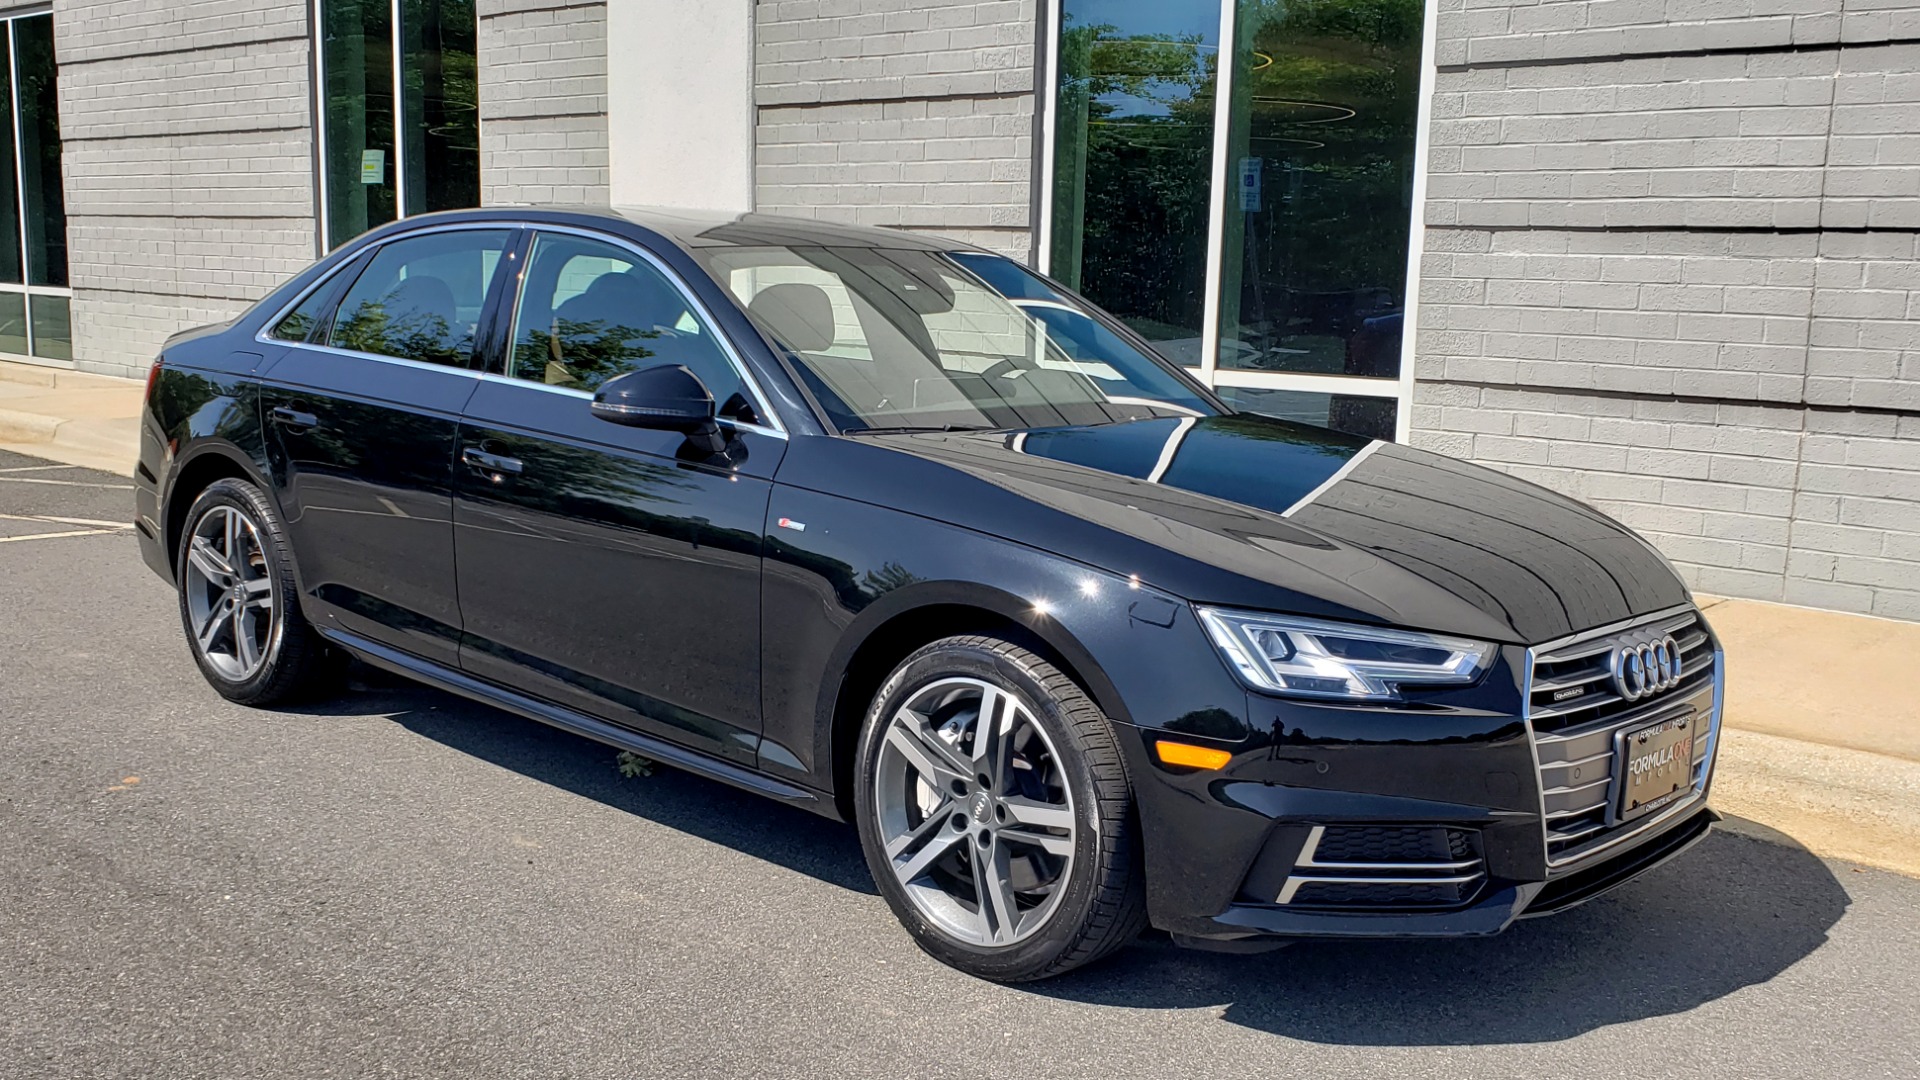 Used 2018 Audi A4 PREMIUM PLUS 2.0T / NAV / SUNROOF / B&O SND / CLD WTHR / REARVIEW for sale Sold at Formula Imports in Charlotte NC 28227 6